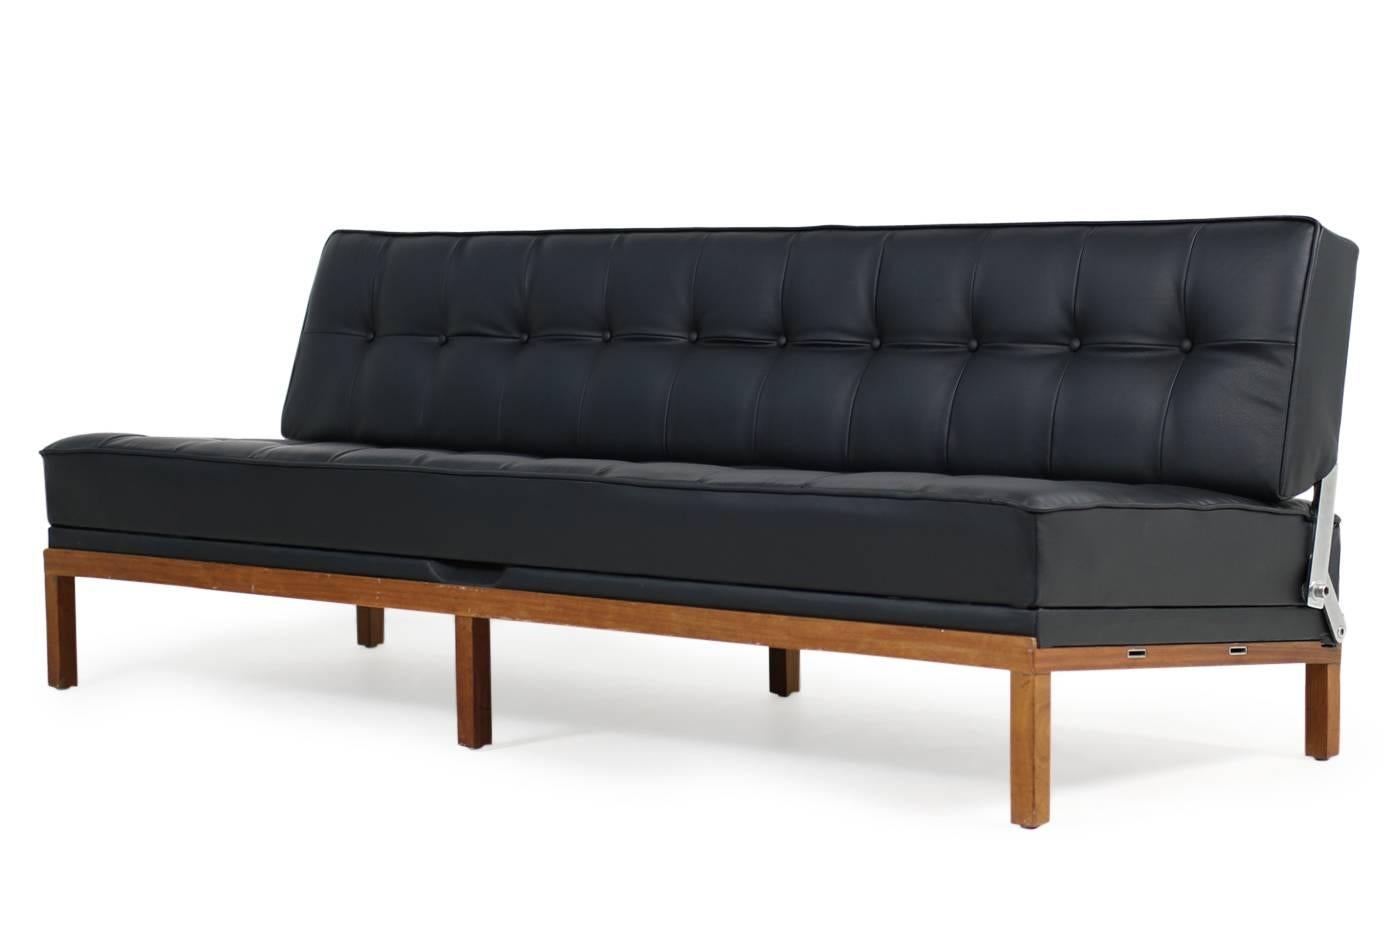 Metal 1960s Daybed by Johannes Spalt Mod. 'Constanze' for Wittmann Teak & Leather Sofa